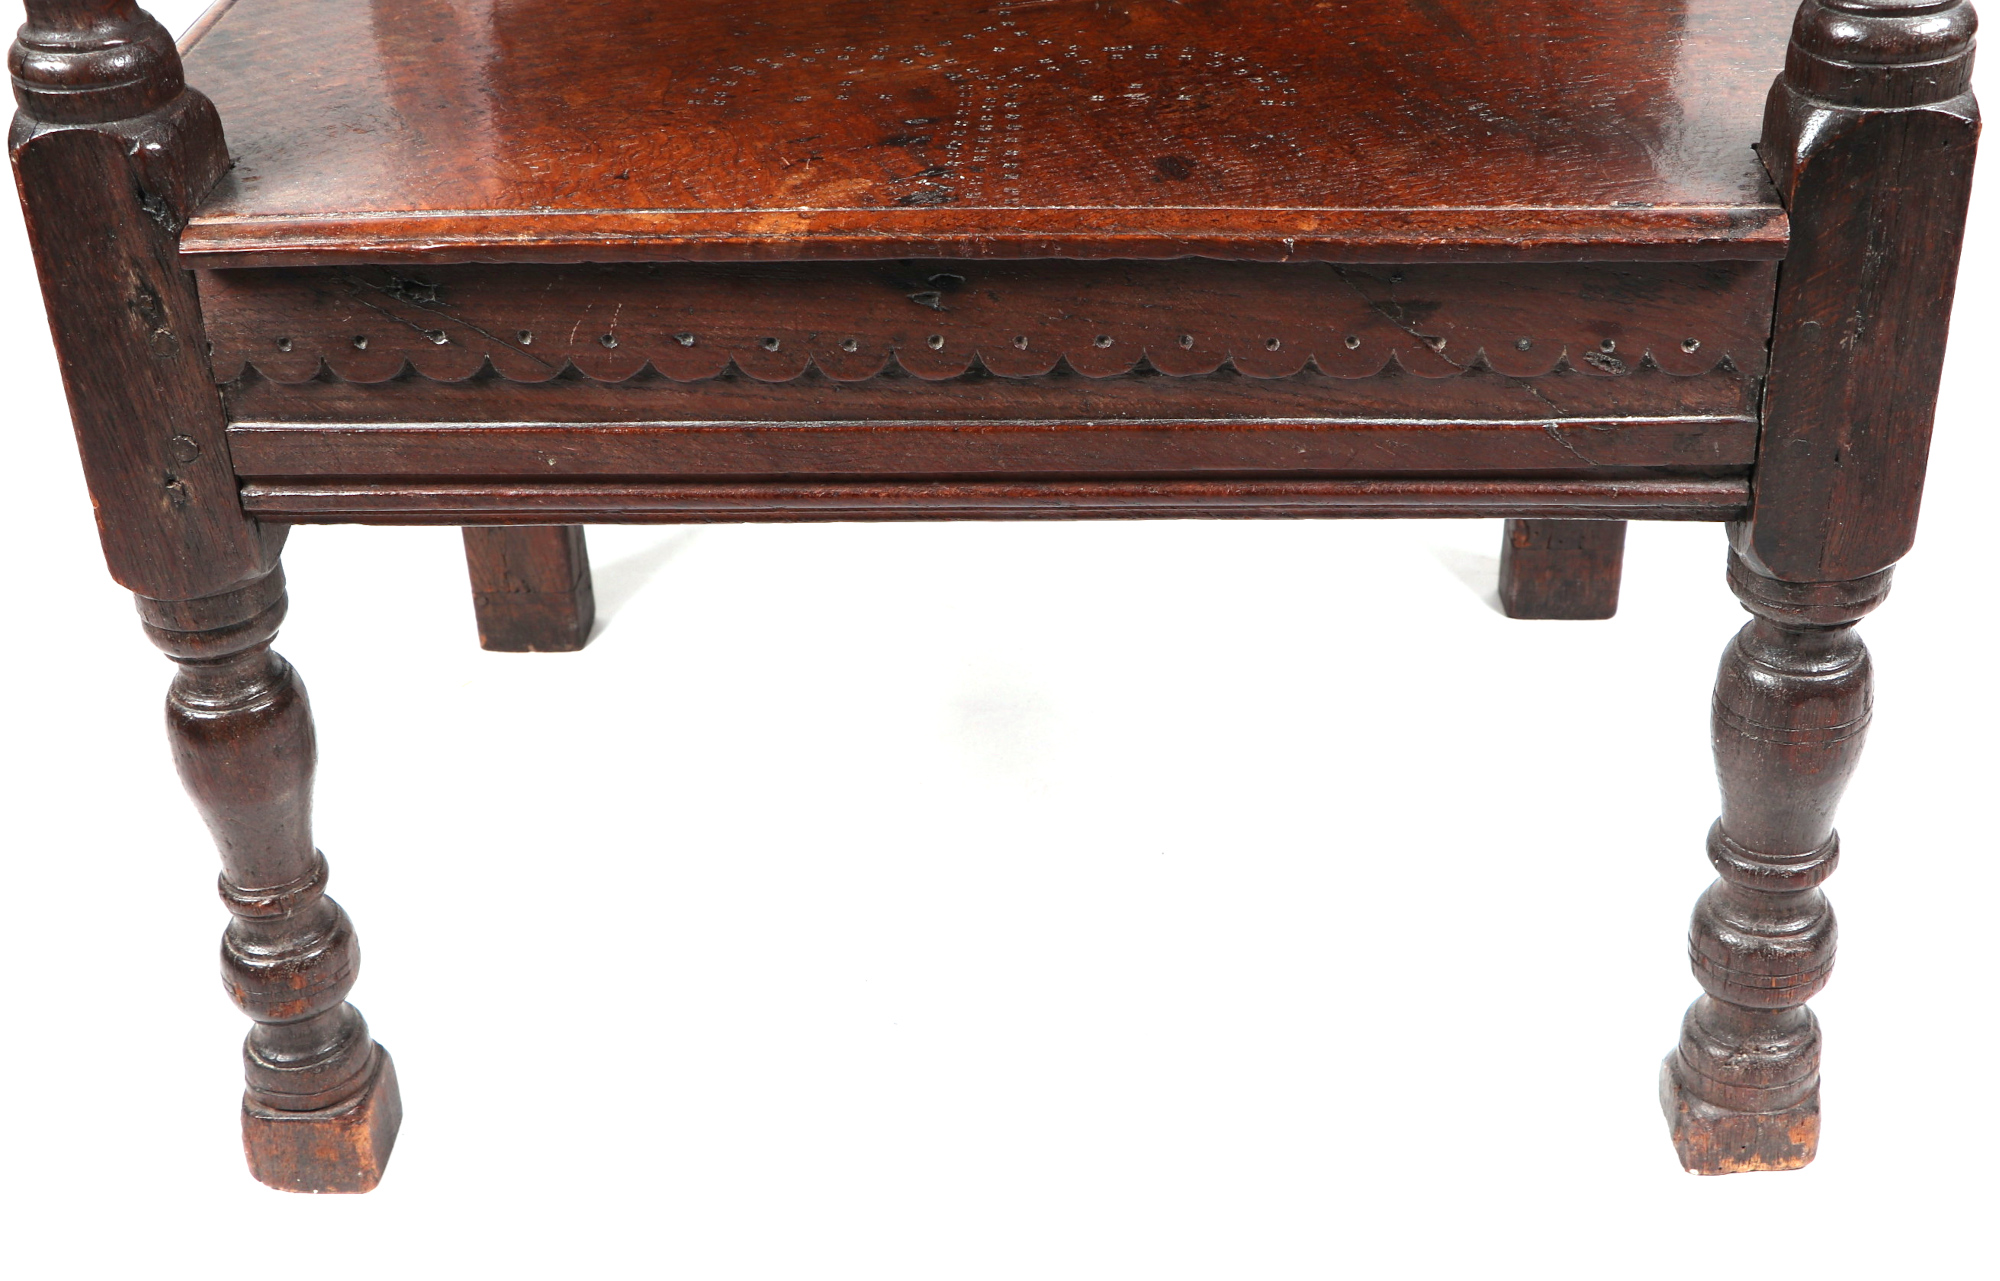 An 18th century style Wainscot type oak chair. - Image 5 of 8